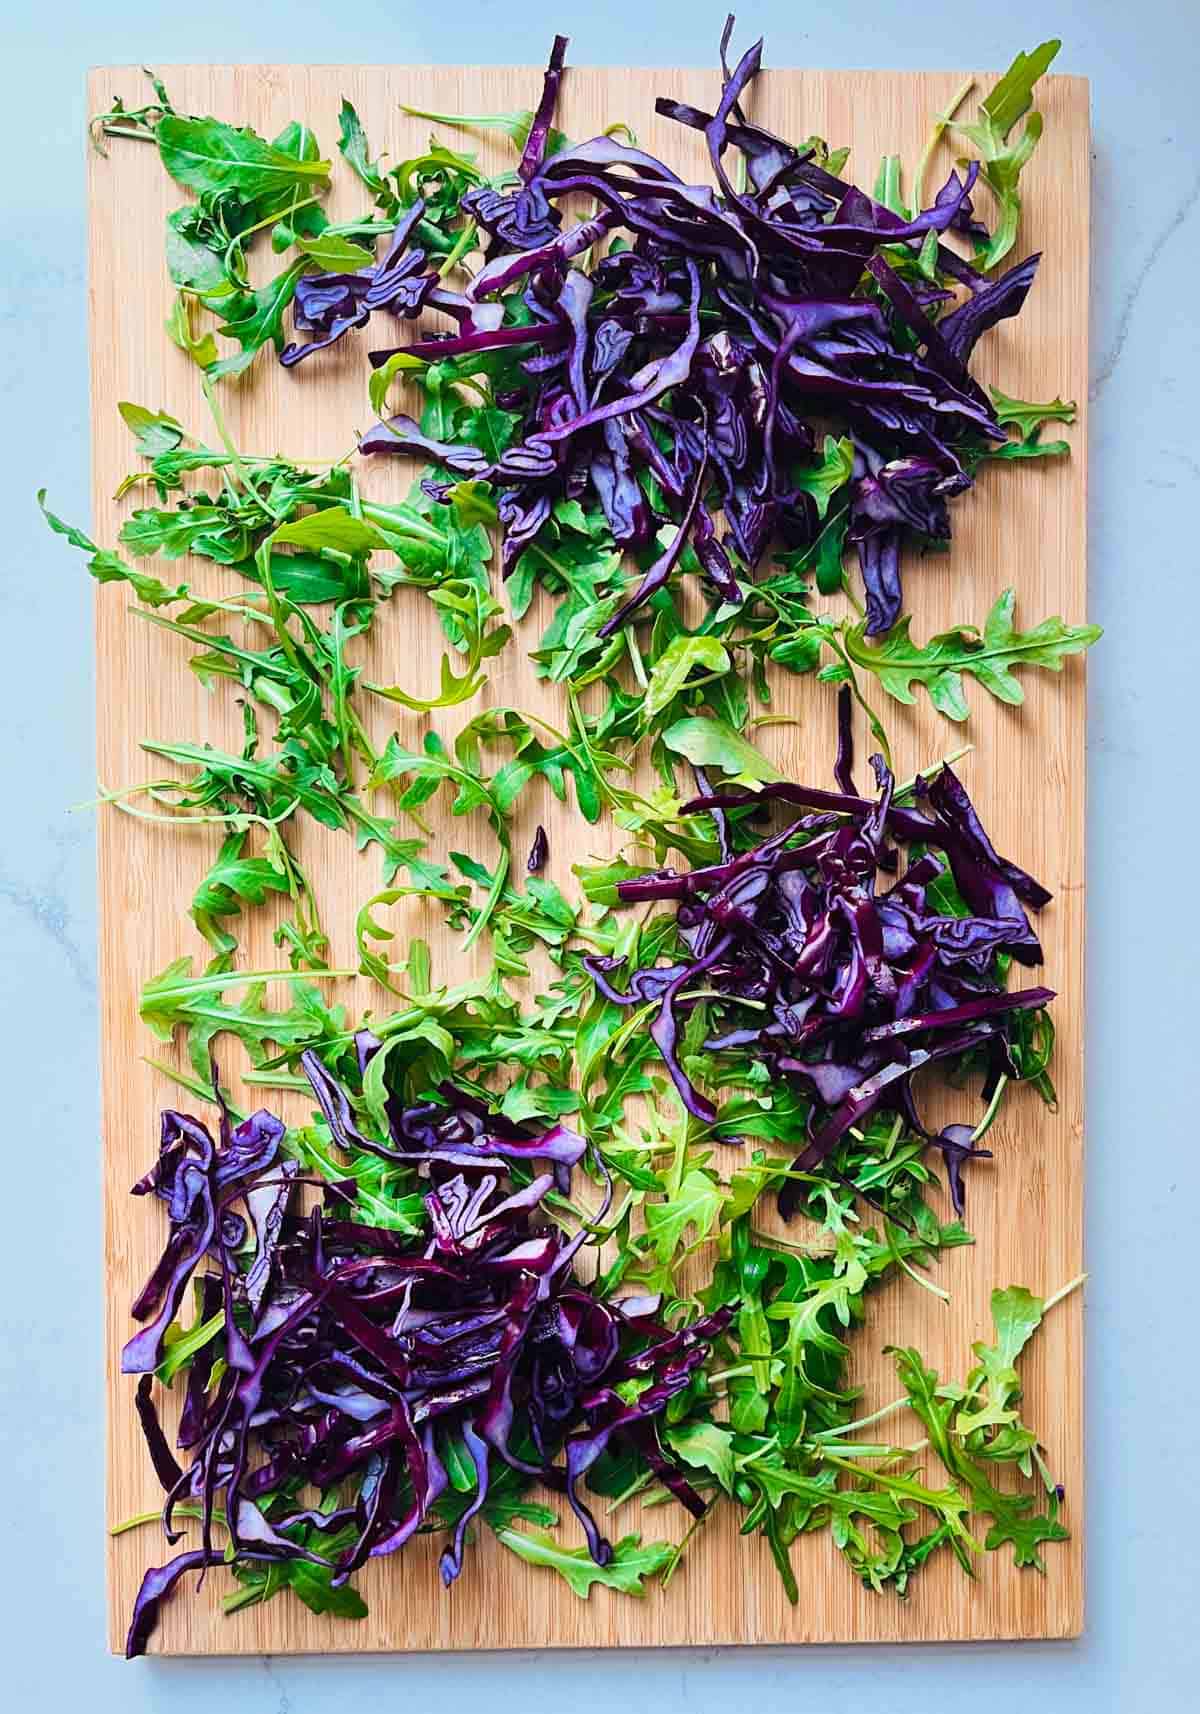 Rocket leaves and chopped red cabbage on a wooded board.